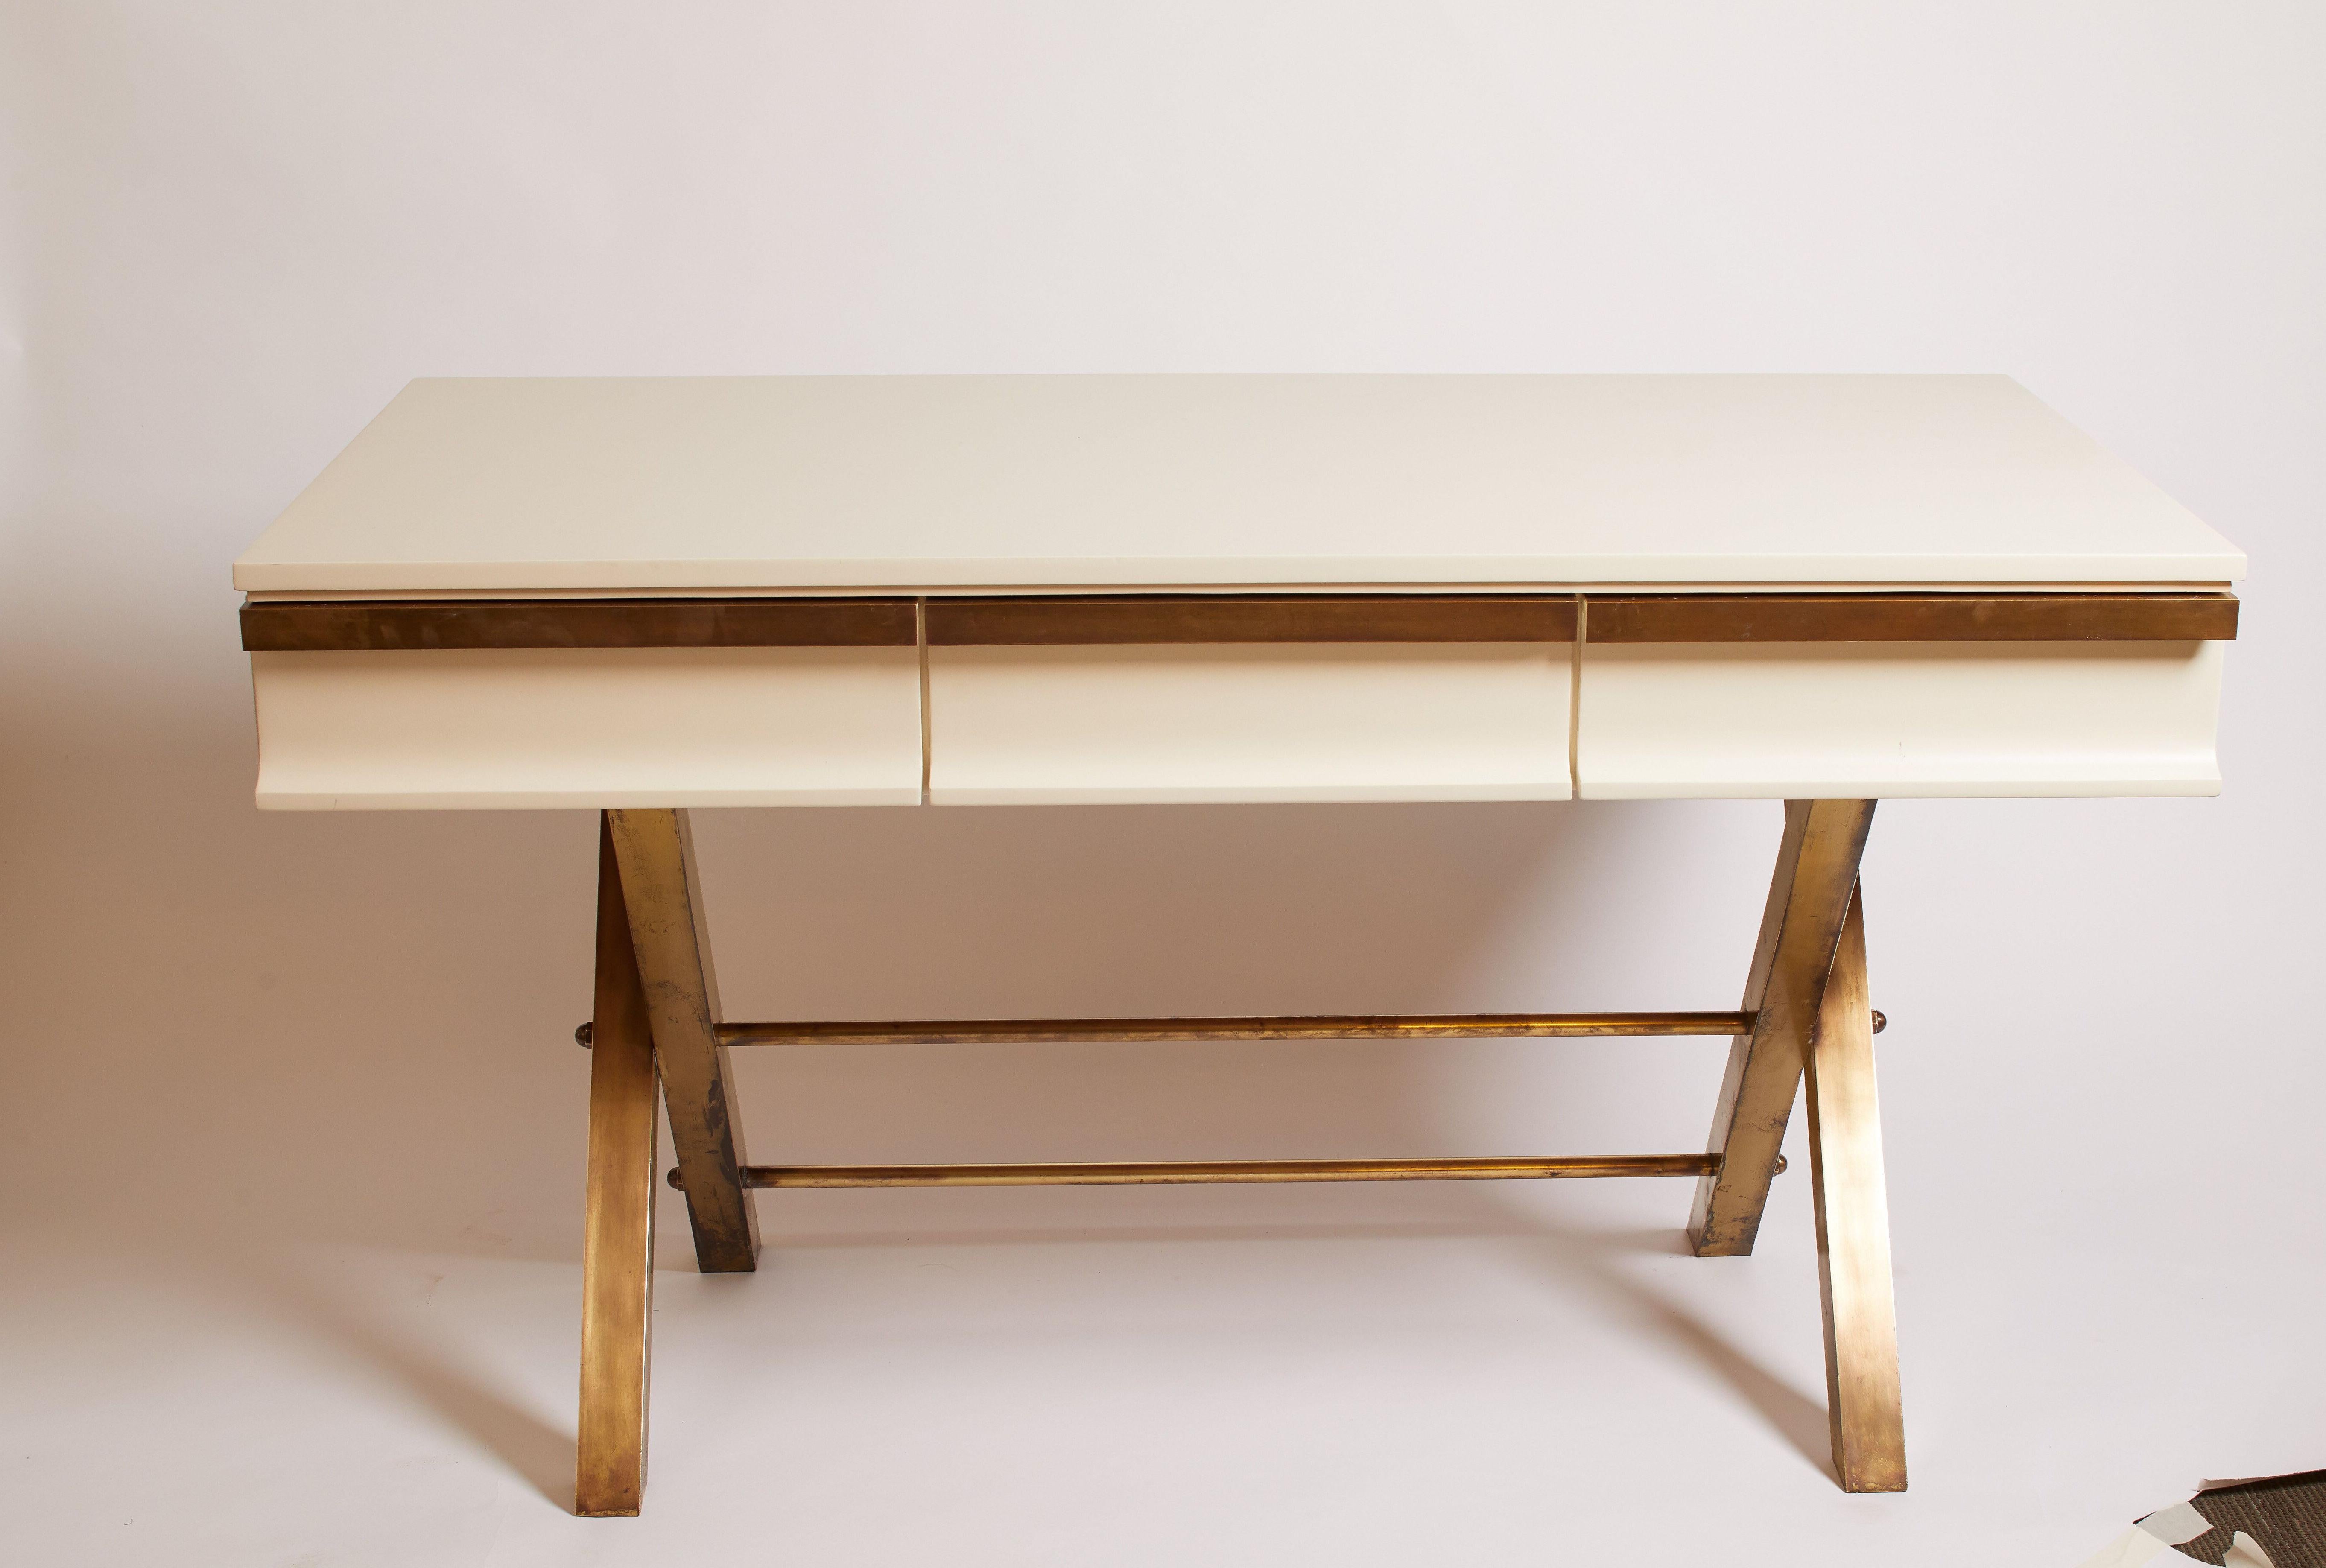 Italian white lacquer desk featuring brass legs and brass details on drawers, circa 1970.